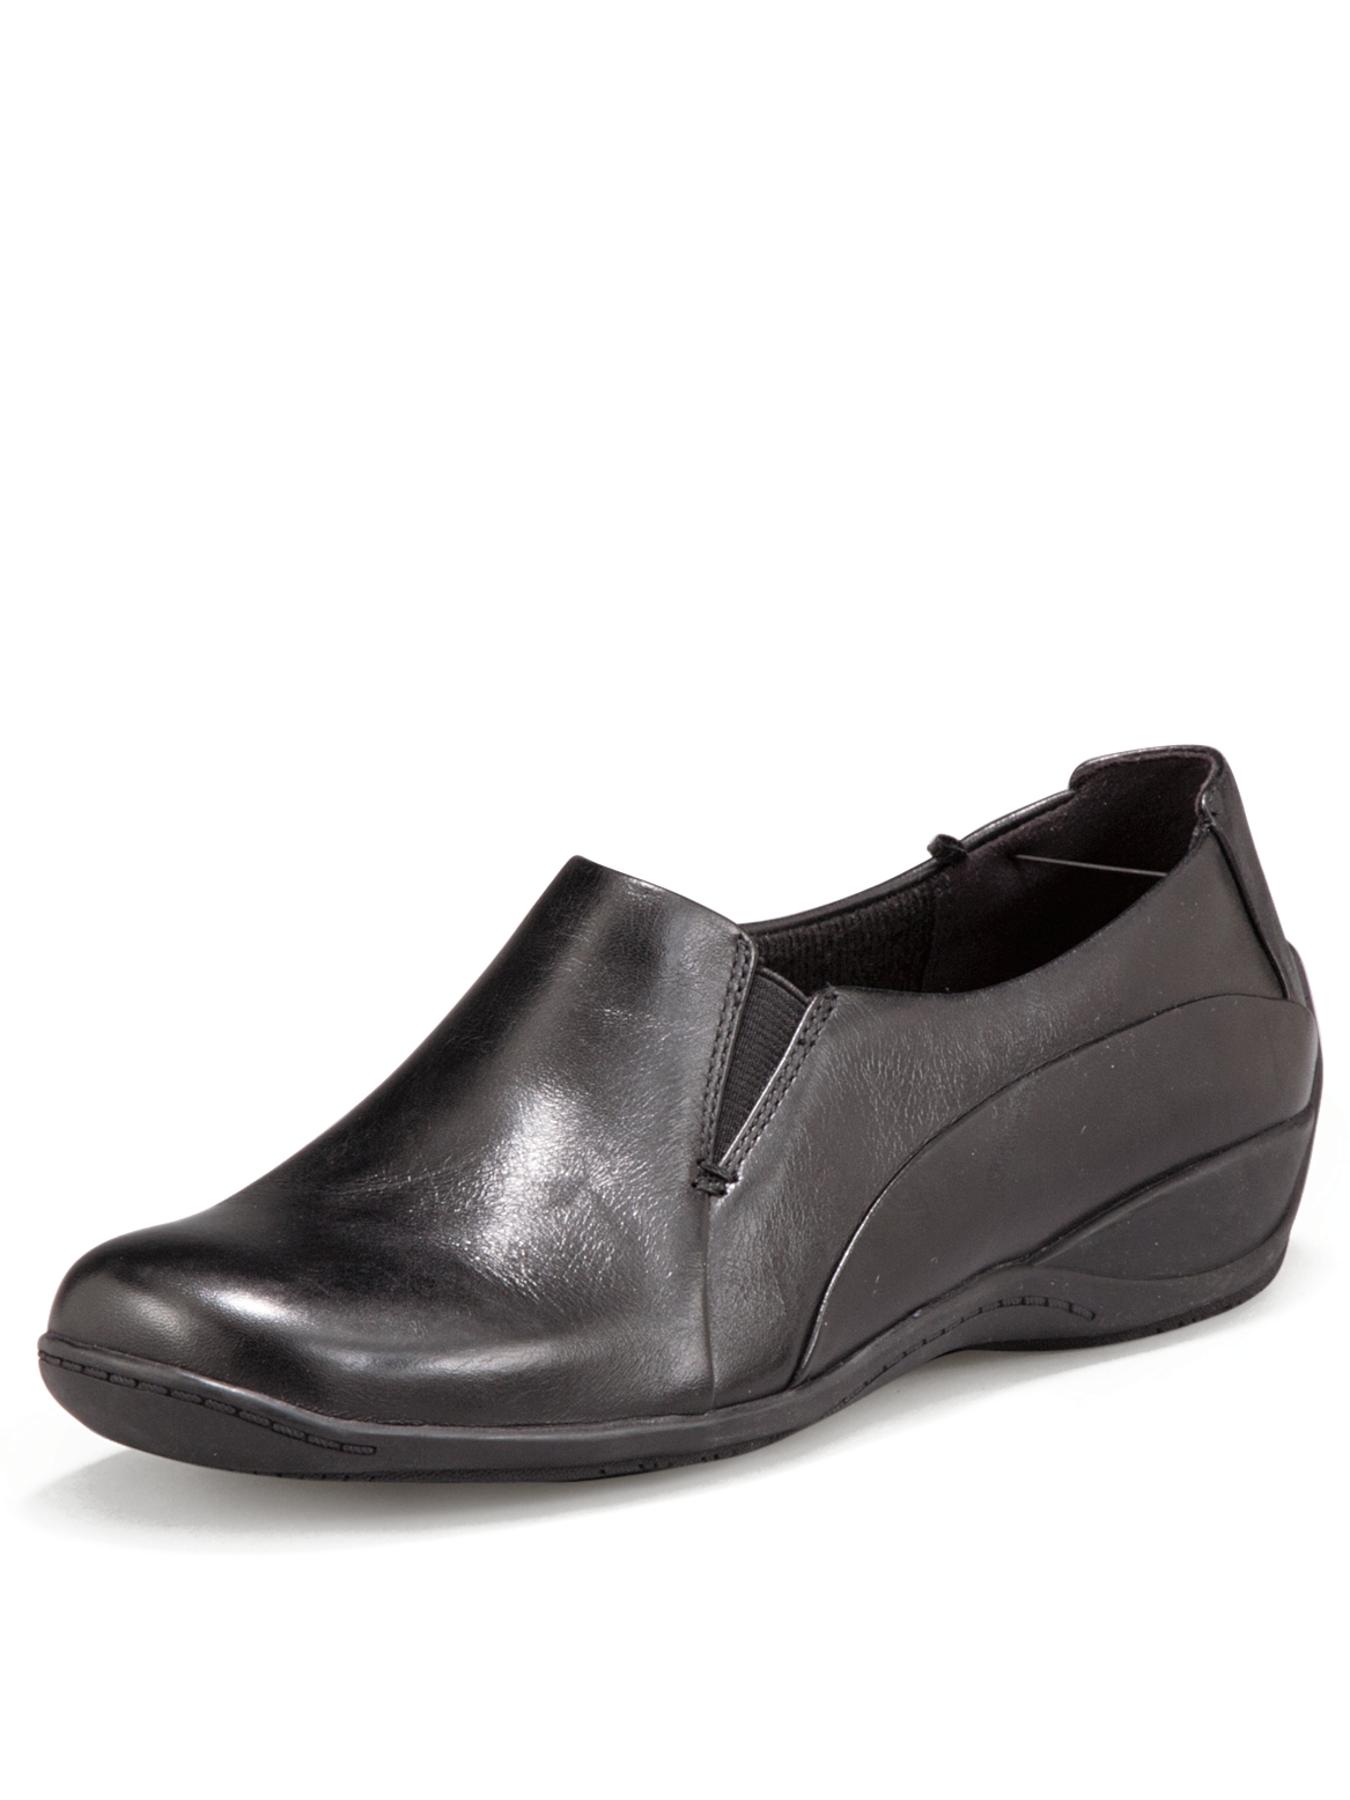 Clarks Coffee Cake Leather Flat Shoes | littlewoodsireland.ie